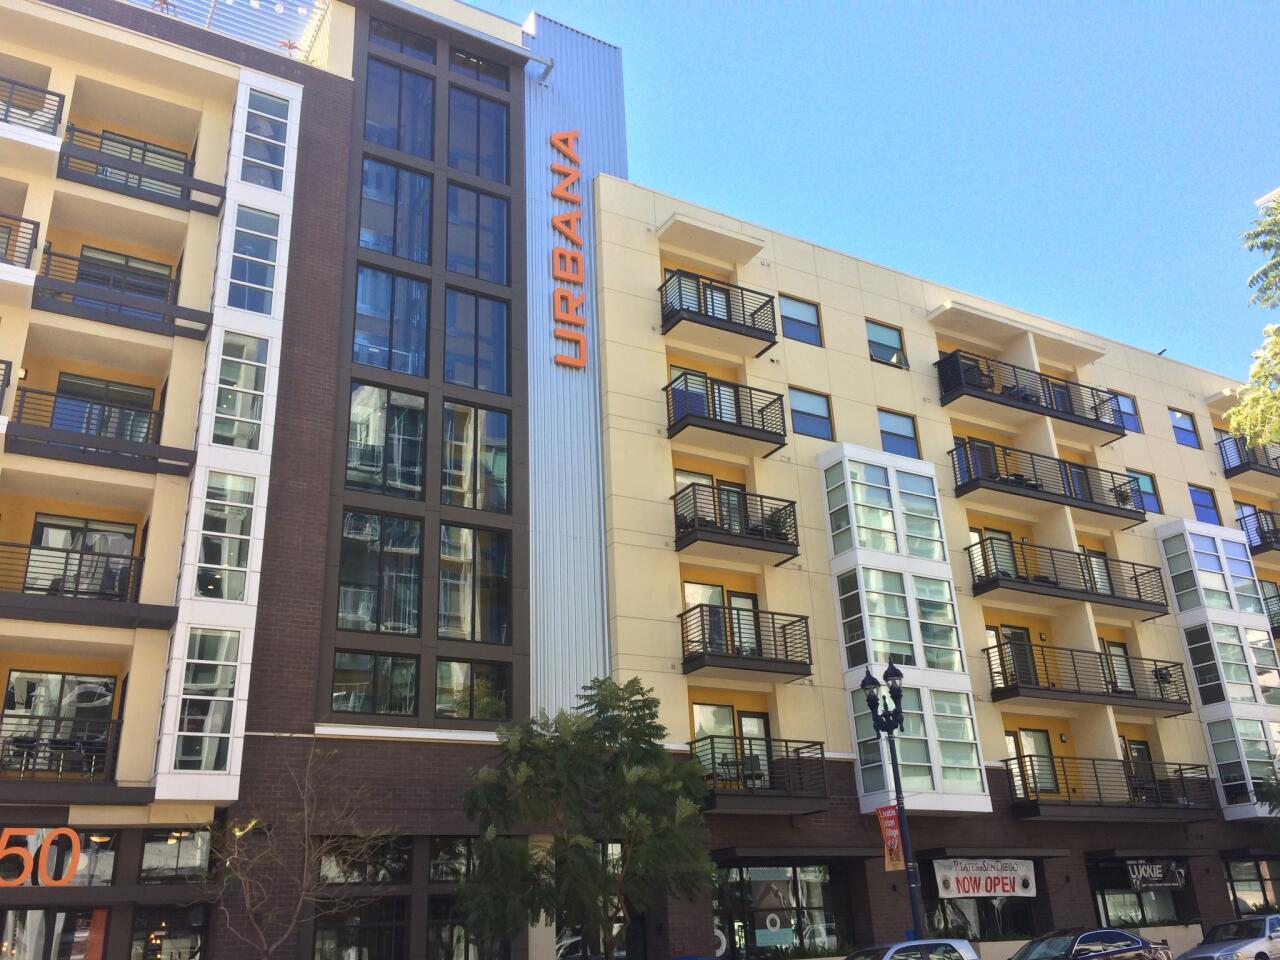 Unit available: One-bedroom Cost range: $299 a night The 96-unit building owned by HG Fenton had one unit on VRBO. The complex was built in 2015 and has a 9.4 percent vacancy rate, according to real estate tracker CoStar. The average rent for a one-bedroom is $2,260 a month.